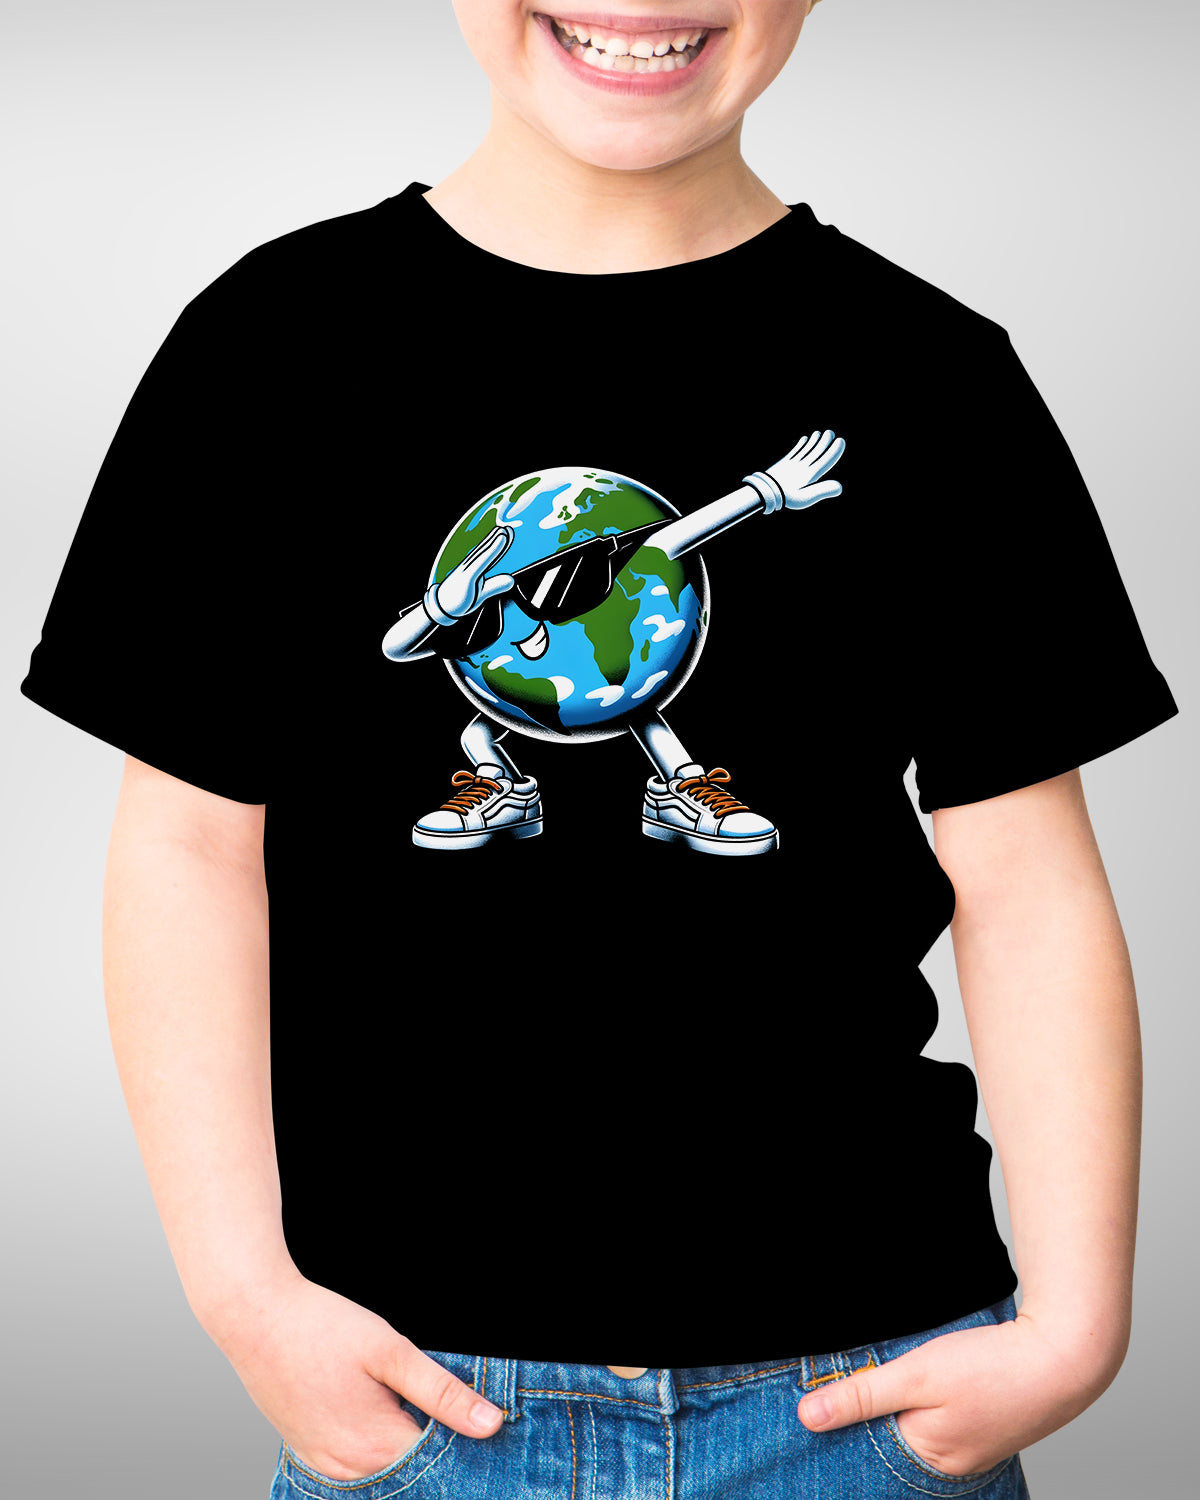 Funny Dabbing Earth Shirt, Planet Lover Tee, Happy Earth Day Celebration, Embrace Care & Dab Dance Fun, April 22